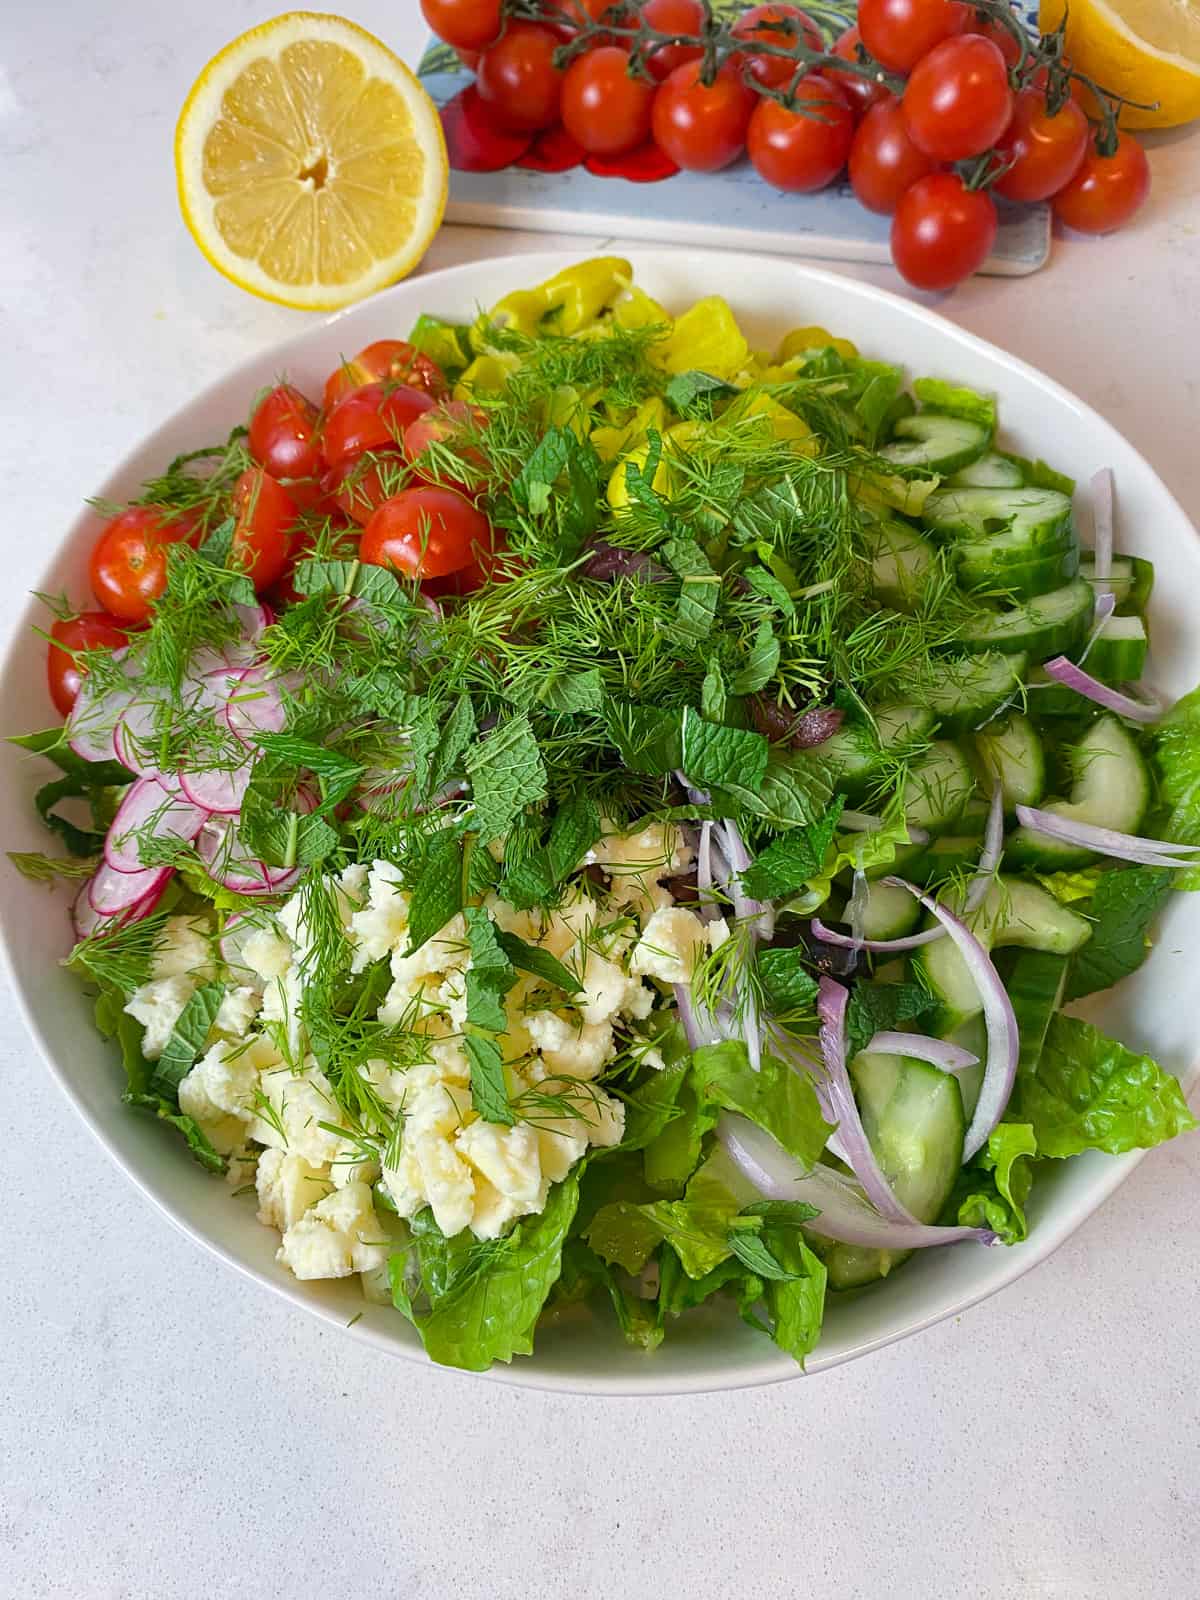 Add the fresh herbs on top of the Greek salad.